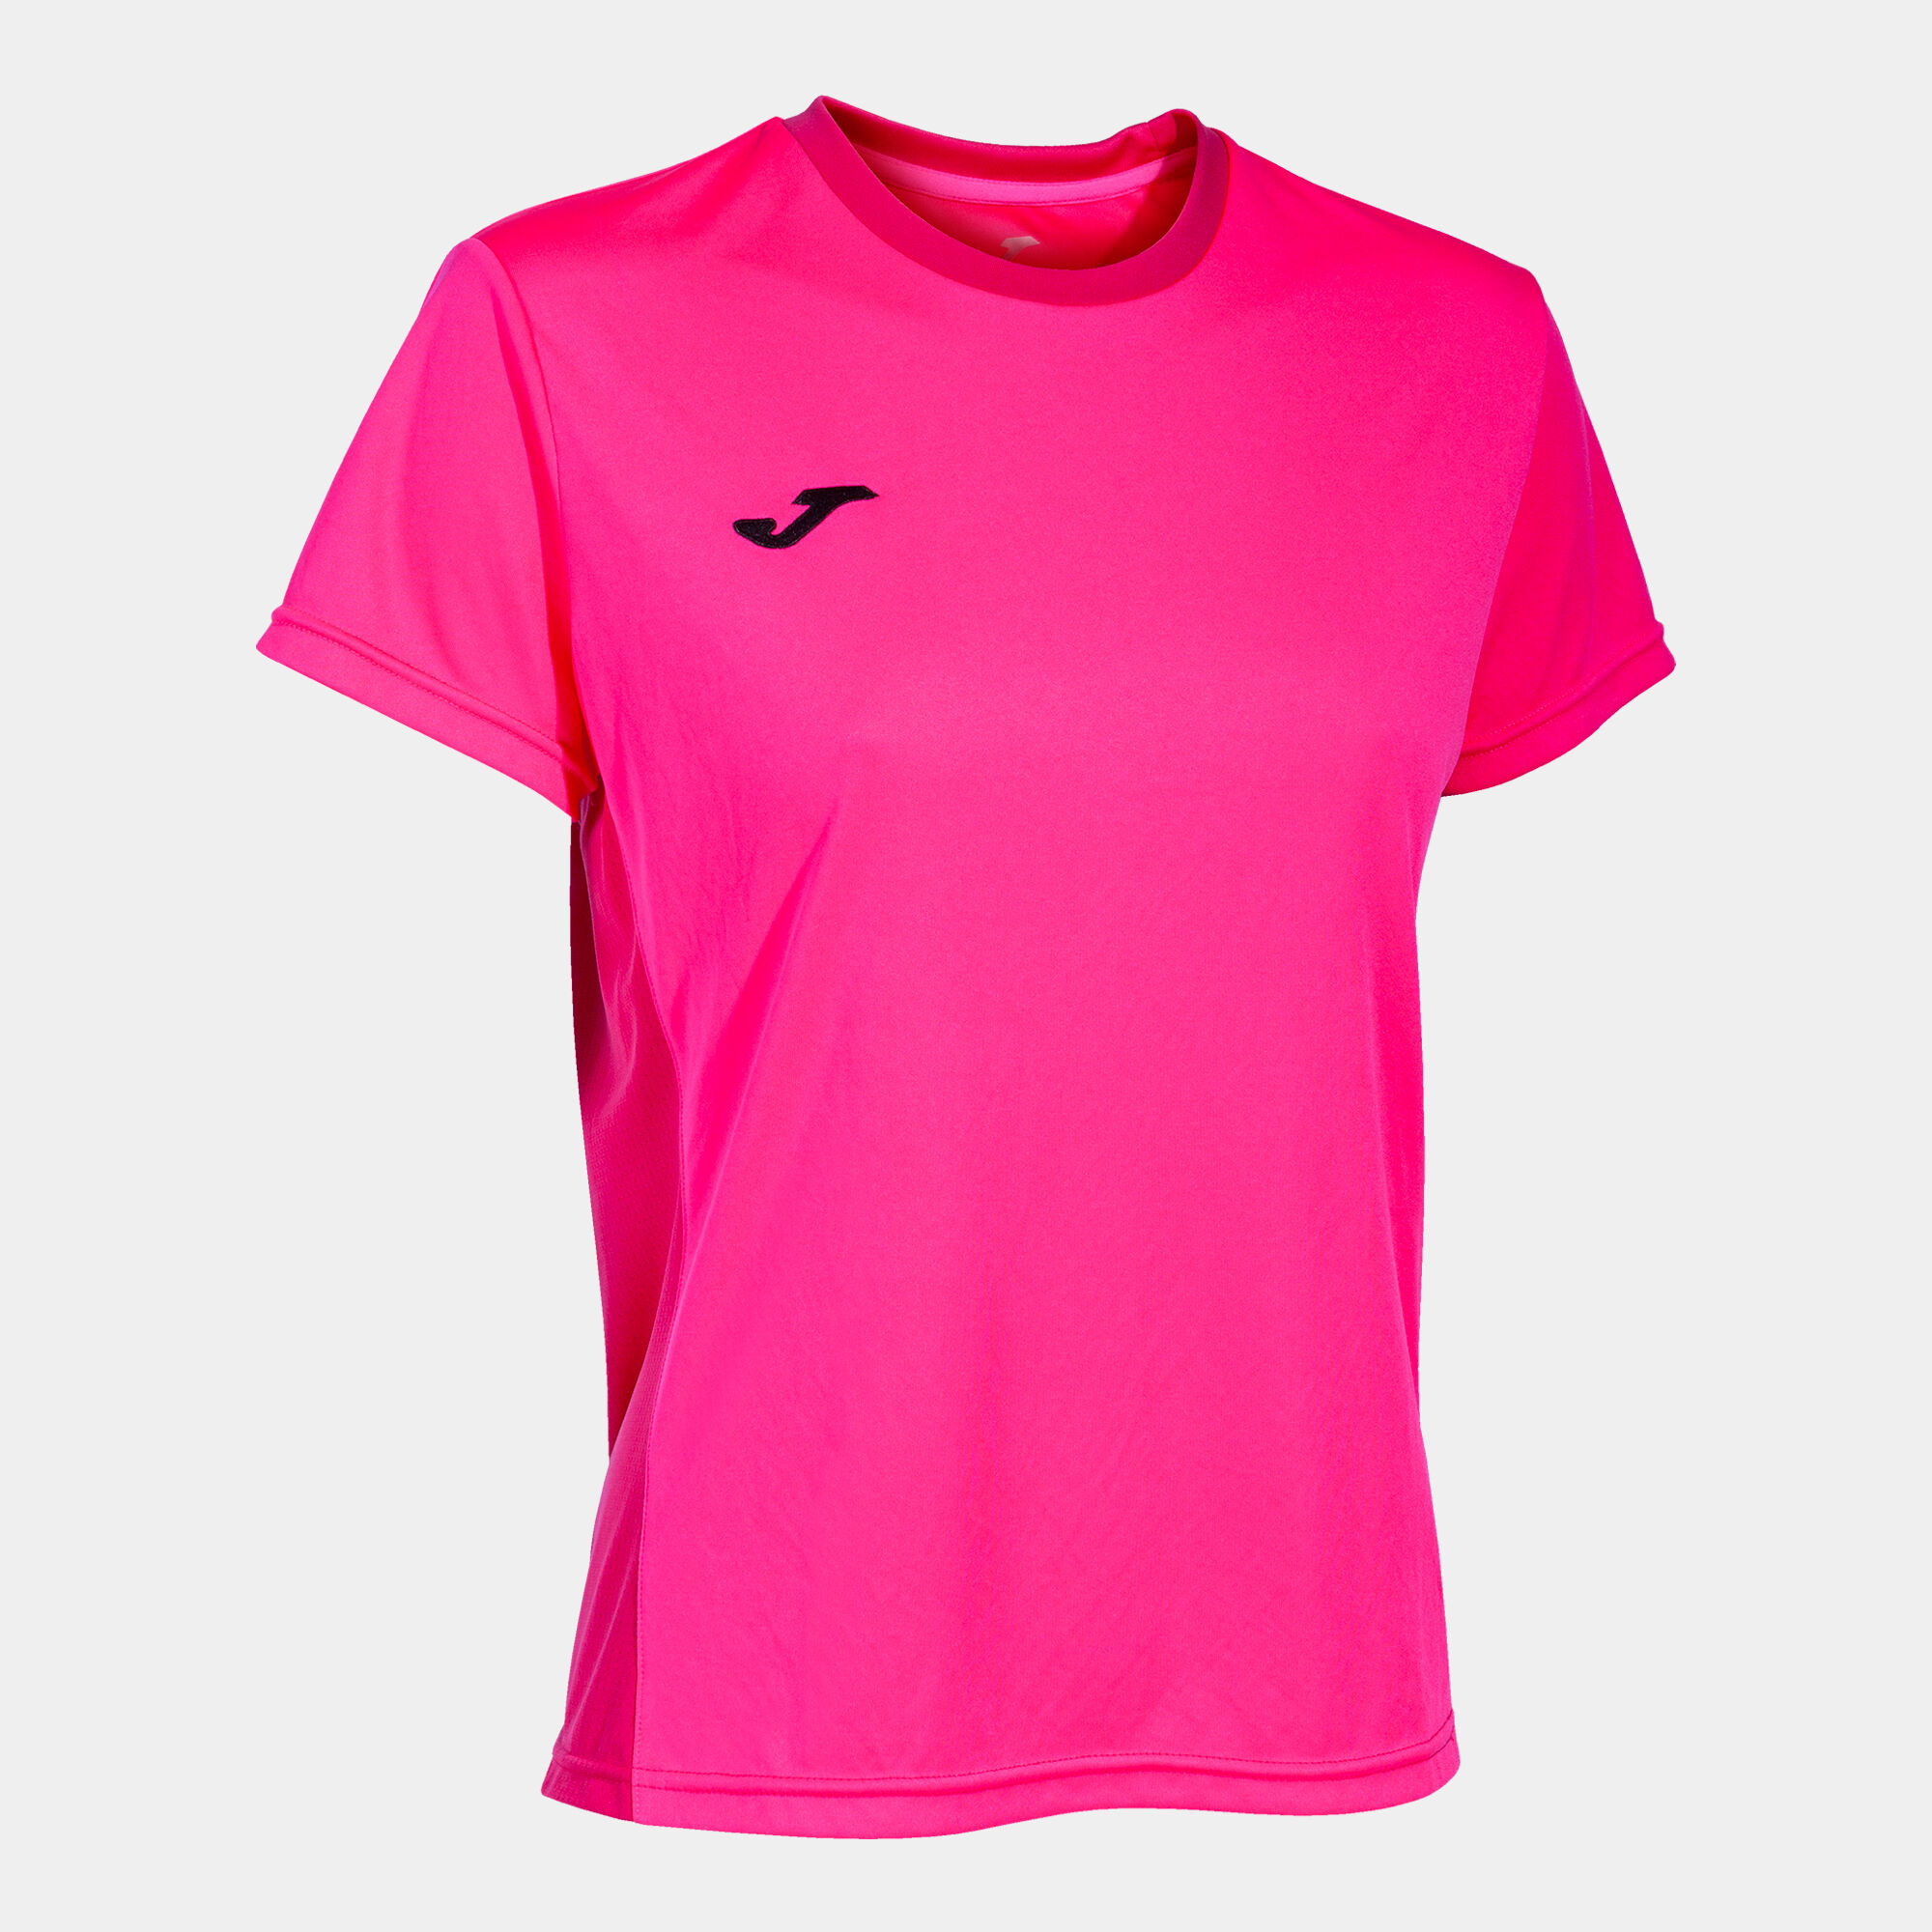 MAILLOT MANCHES COURTES FEMME WINNER II ROSE FLUO